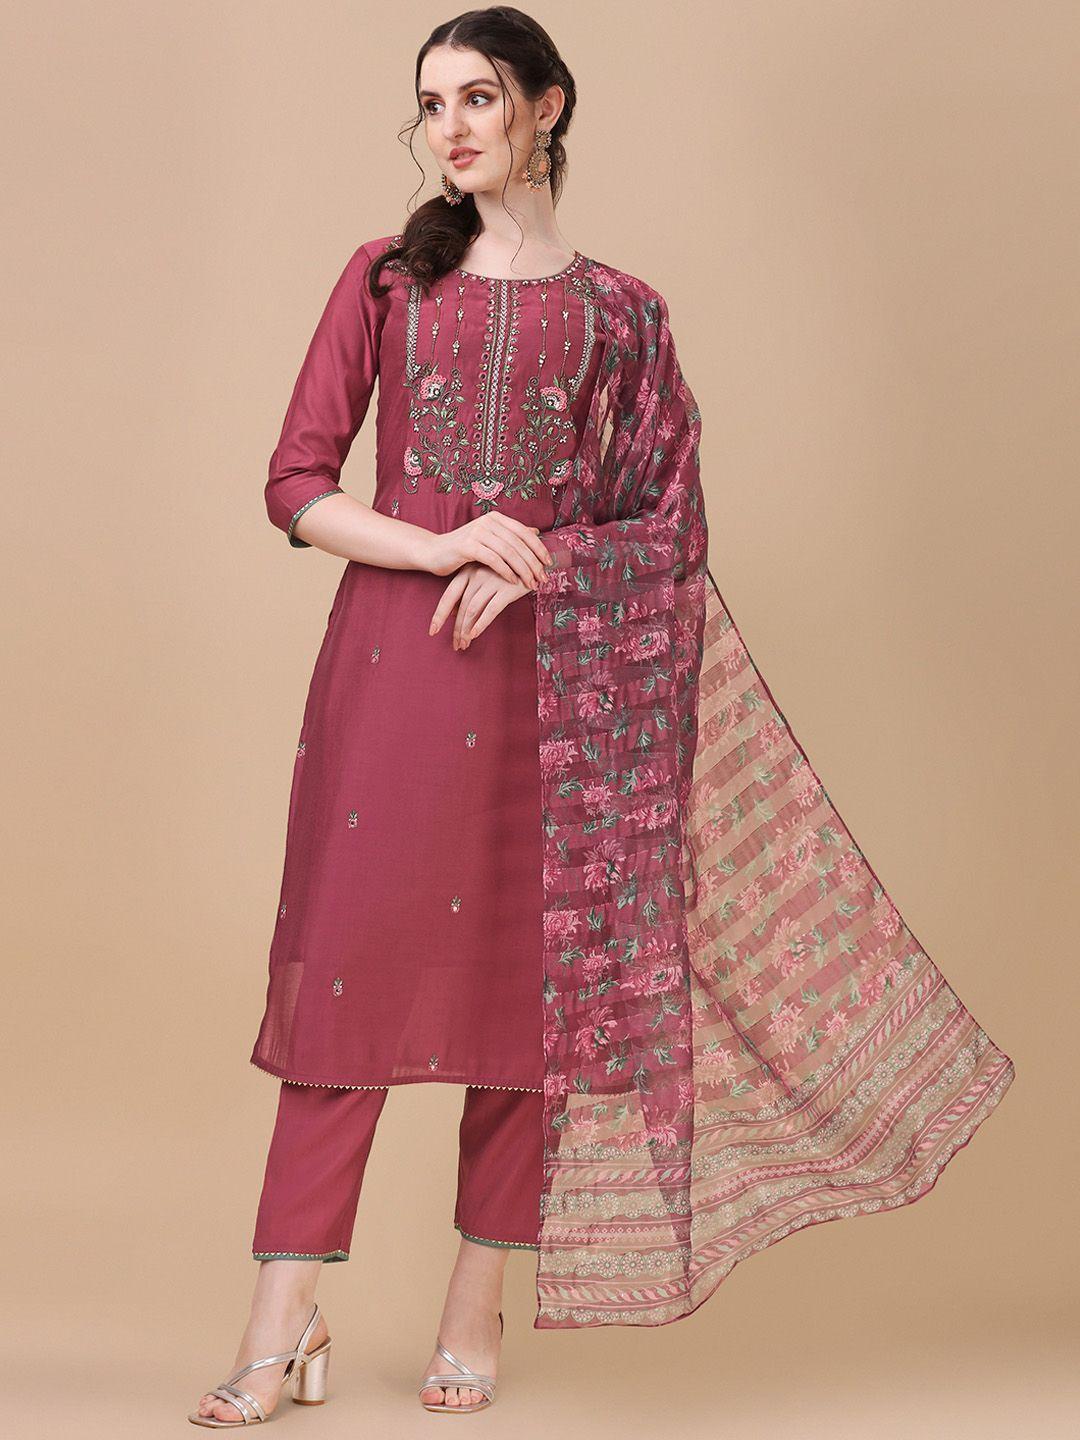 berrylicious women embroidered beads and stones chanderi cotton kurta with trousers & dupatta